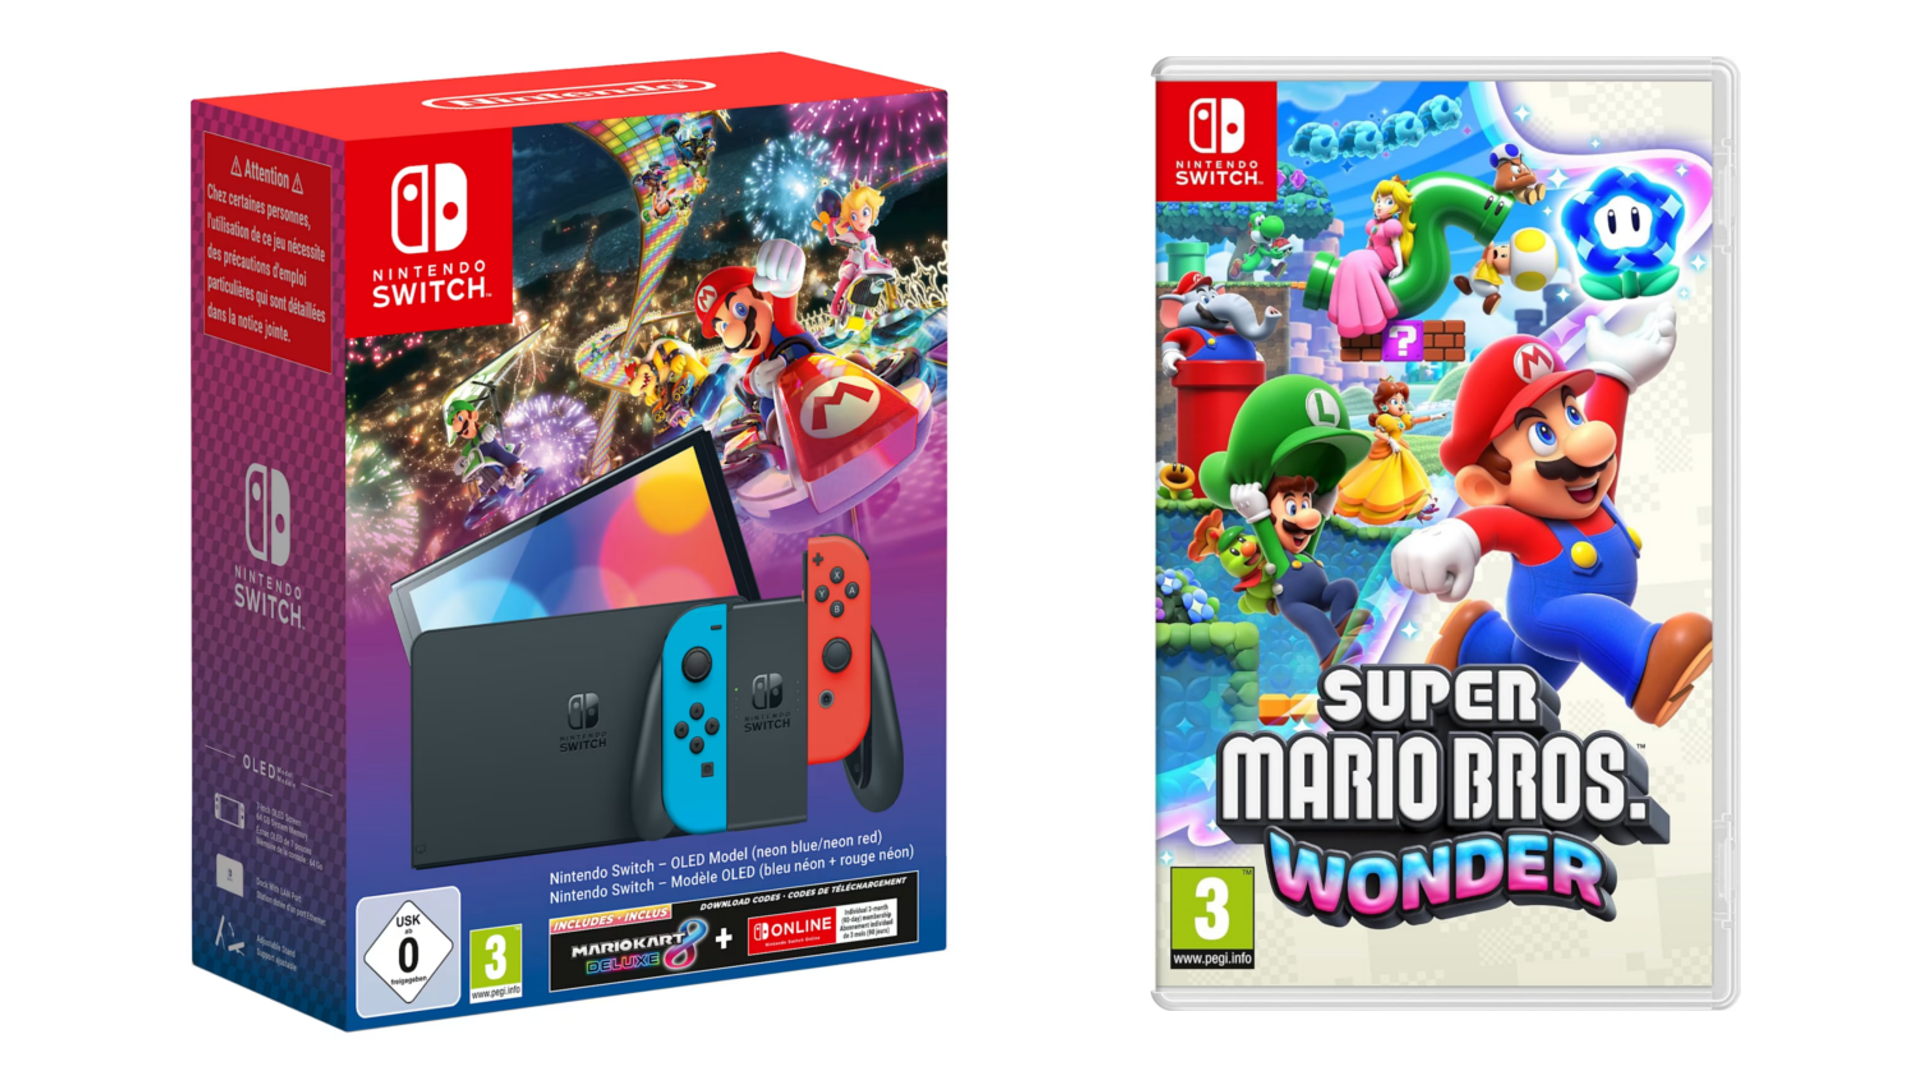 Pack Nintendo Switch OLED + Mario Kart Deluxe : offre incroyable pour le  Black Friday chez Cdiscount